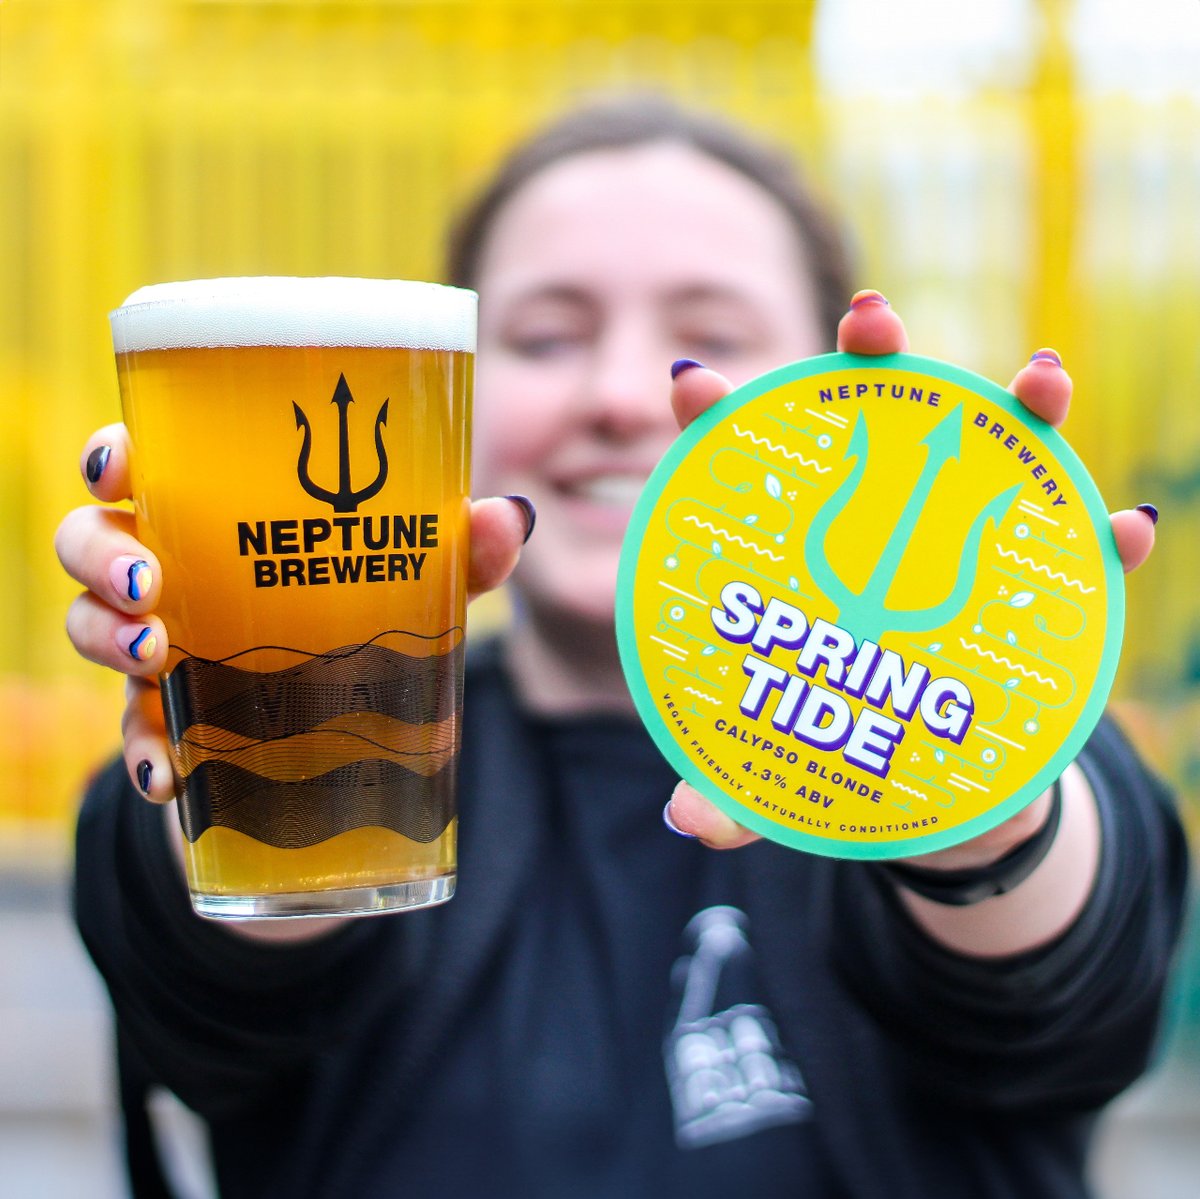 Spring Tide is debuting tonight at our 9th Birthday! 🎉 This 4.3% Calypso Blonde has light citrus and pear fruit with malt biscuit notes, finishing with a light bitterness. ℹ️ Available in cask & keg. Trade customers, head over to Sellar to order: bit.ly/NeptuneonSellar